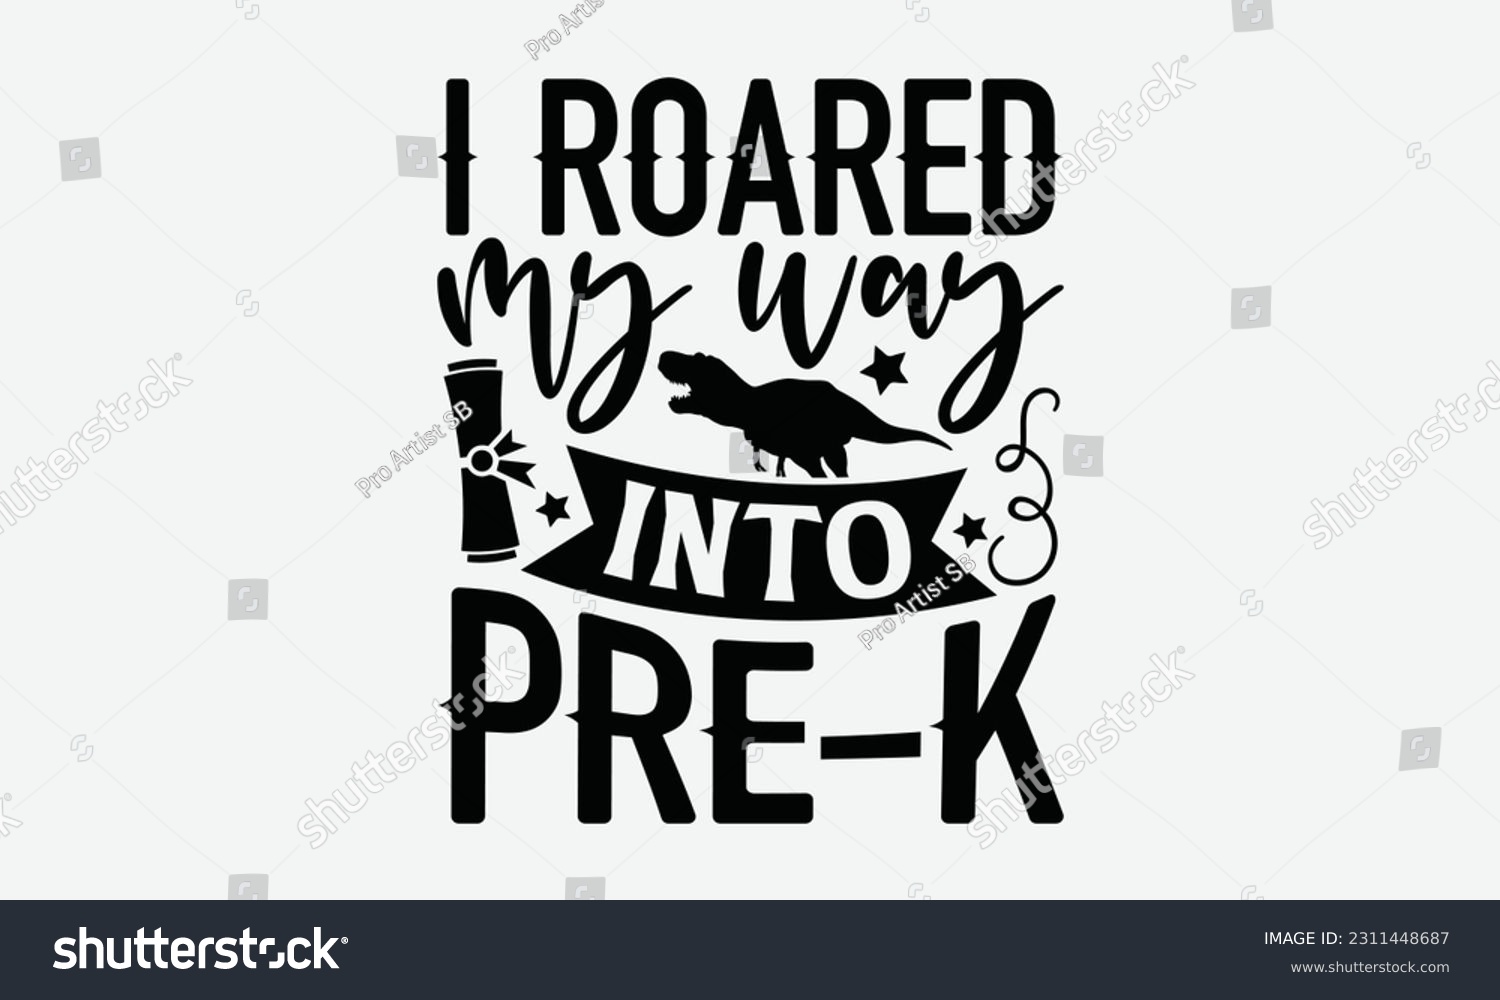 SVG of I Roared My Way Into Pre-K - Dinosaur SVG Design, Motivational Inspirational T-shirt Quotes, Hand Drawn Vintage Illustration With Hand-Lettering And Decoration Elements. svg